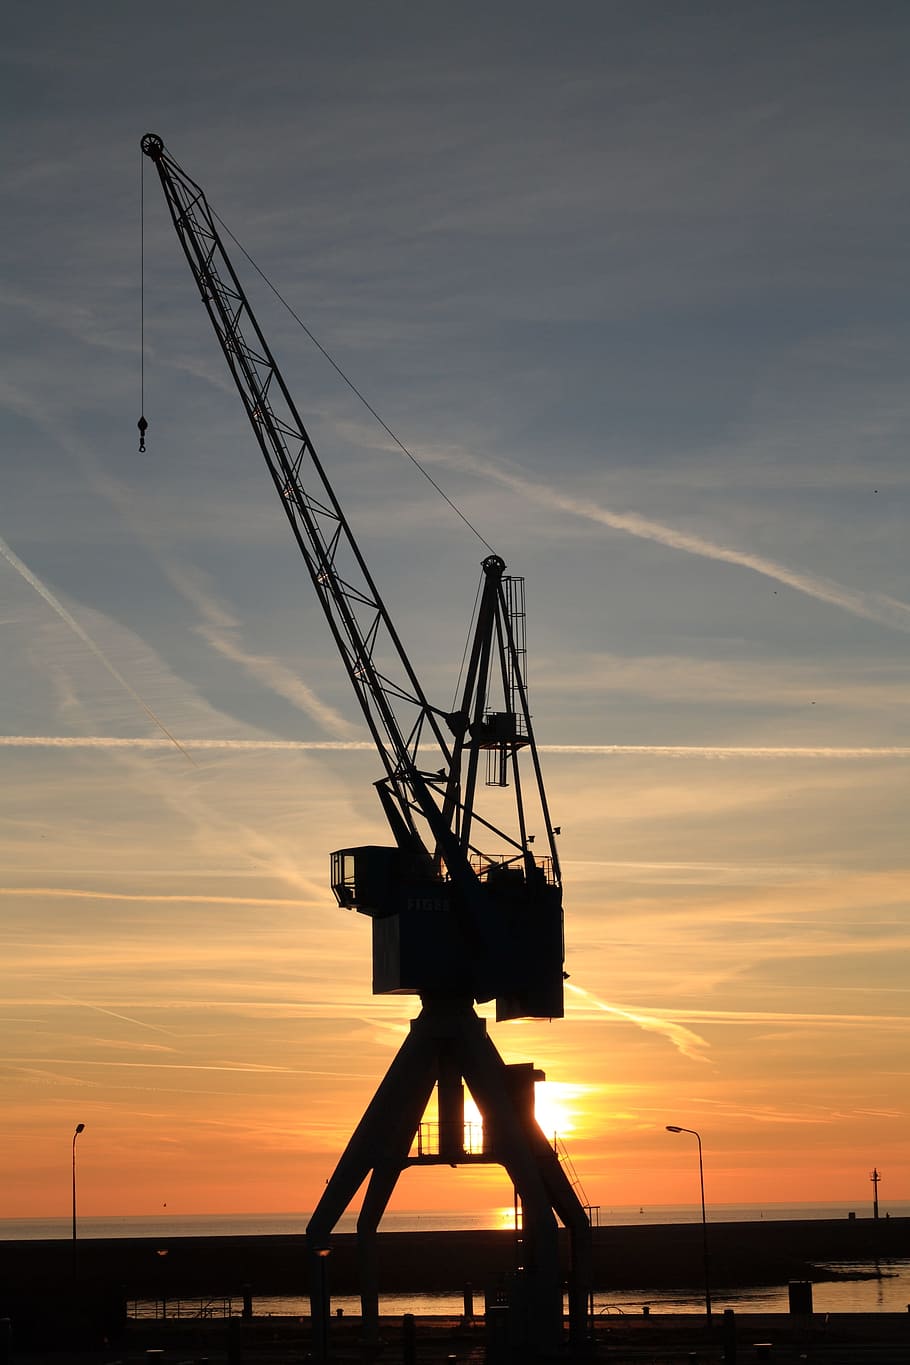 Netherlands, Harlingen, Crane, Harbour, sunset, freight transportation, cargo container, crane - construction machinery, shipping, industry